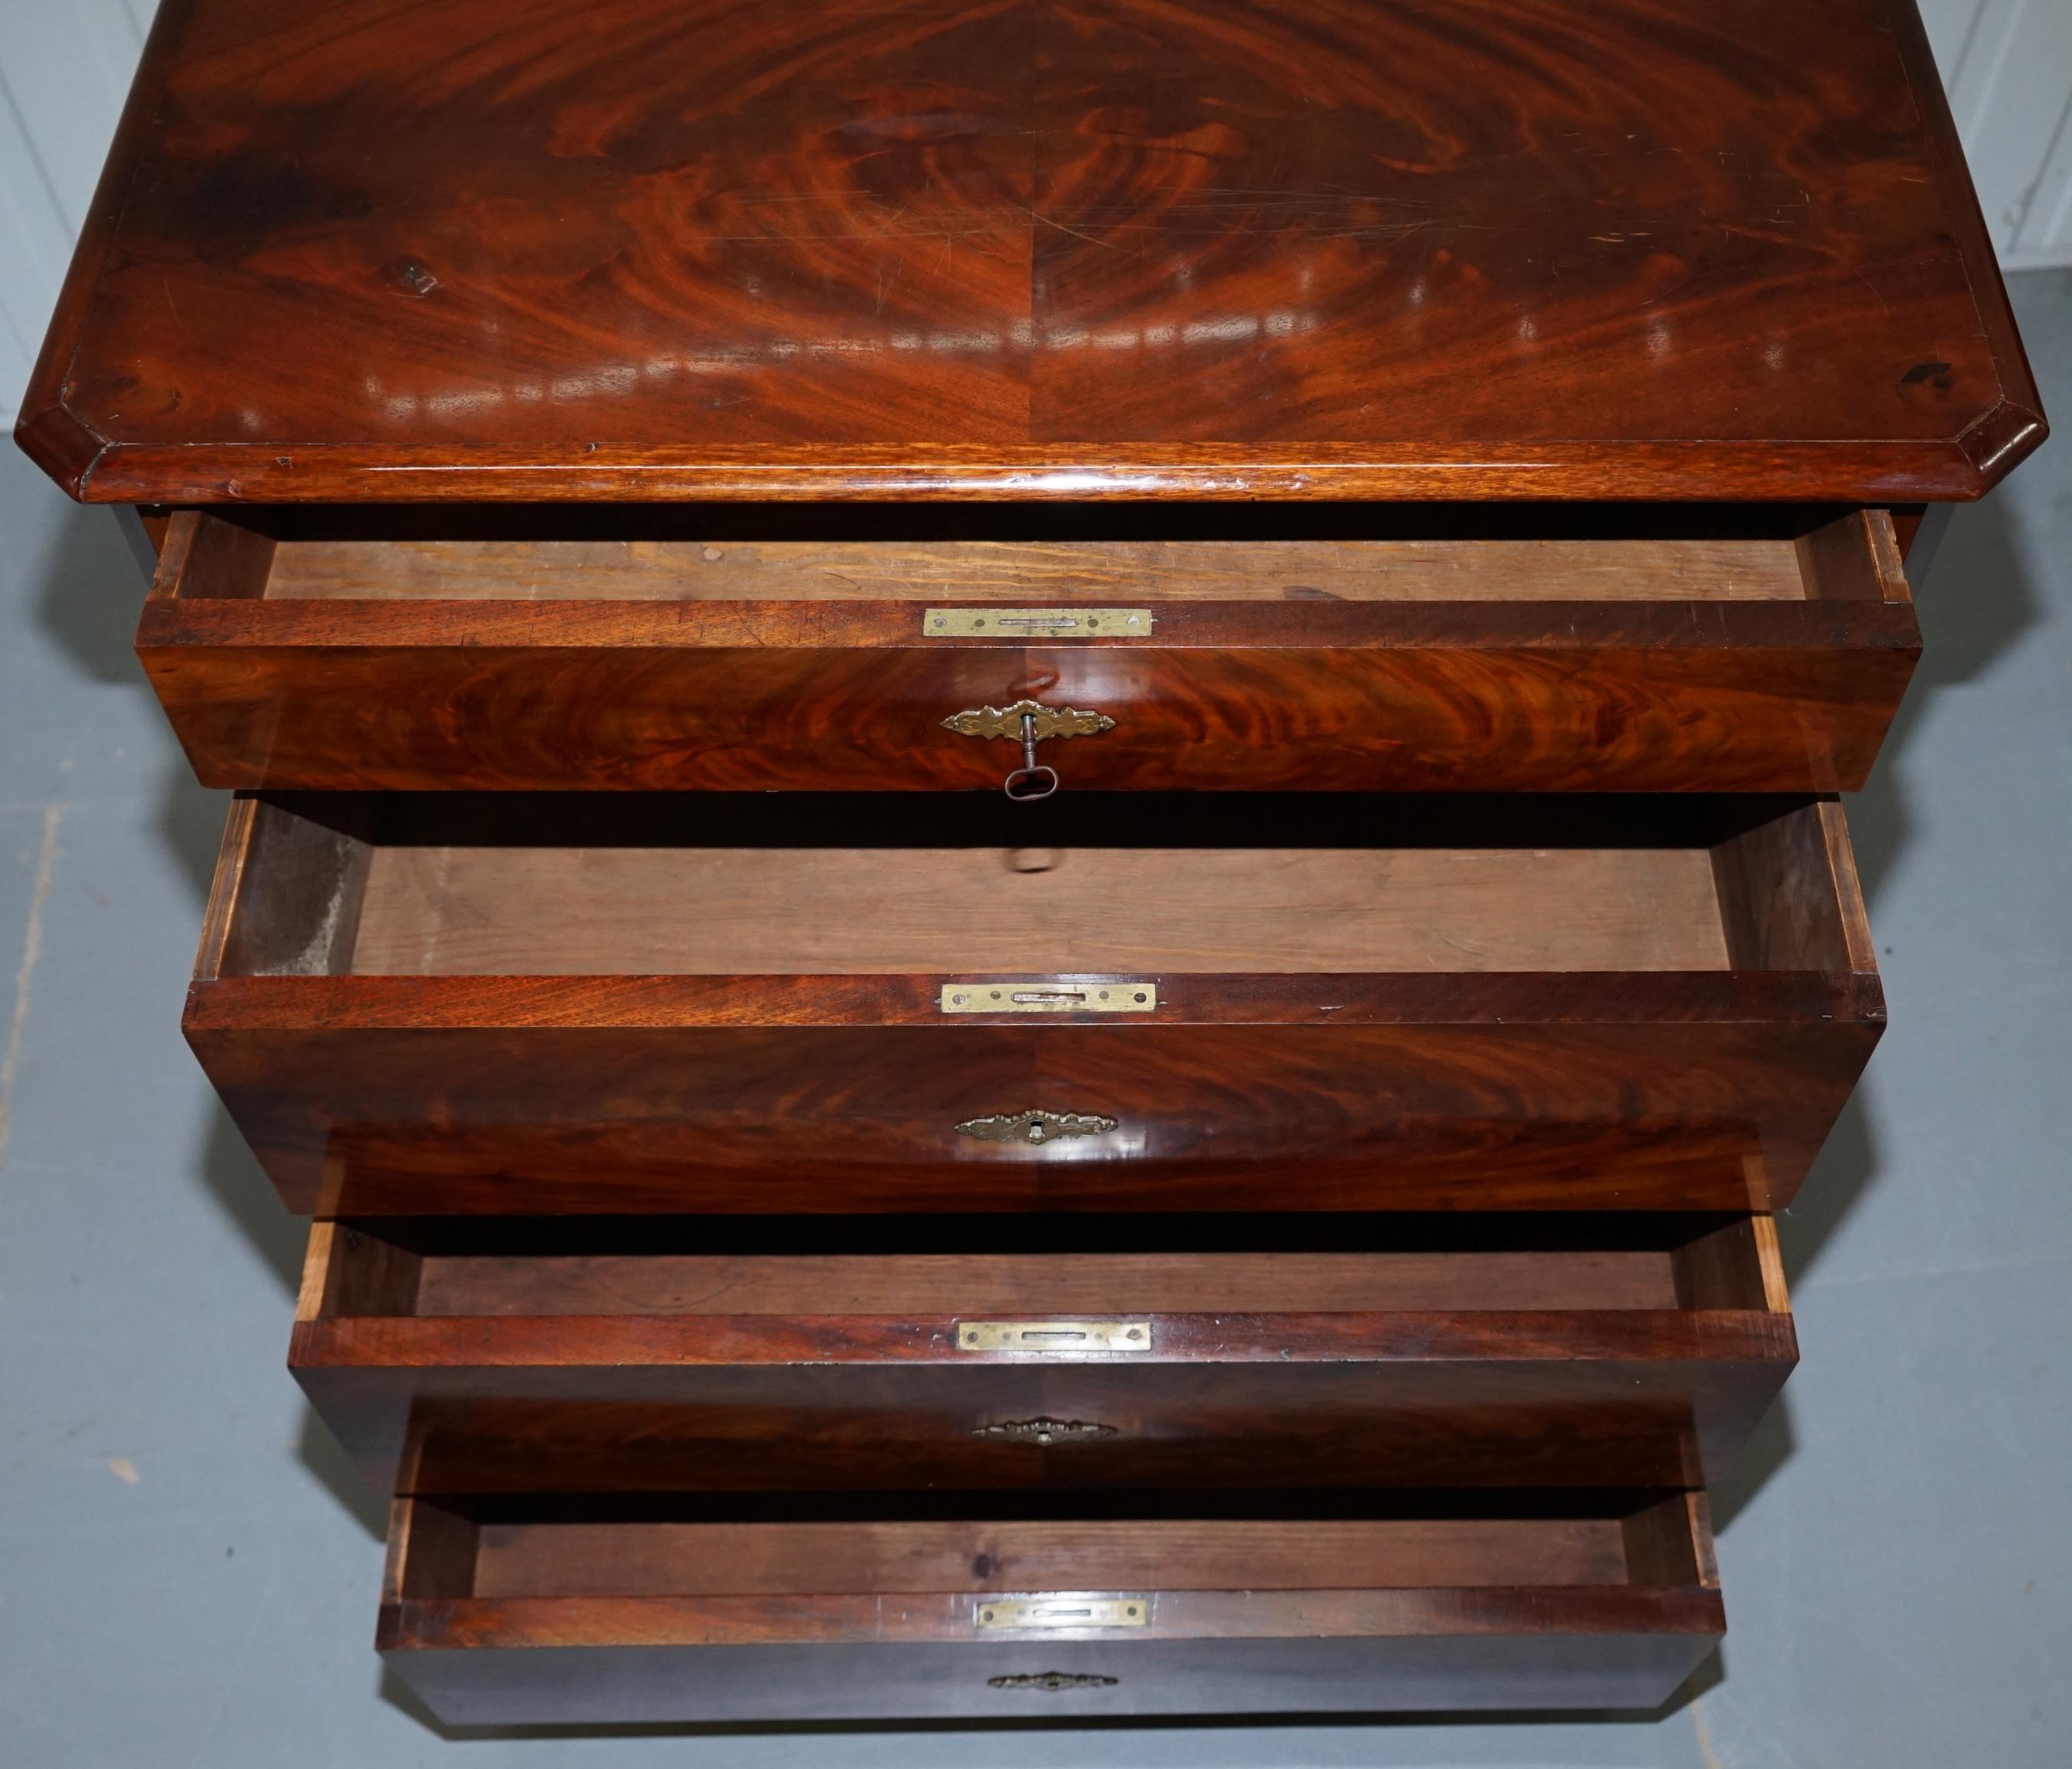 Stunning Biedermeier Flamed Mahogany Small Chest of Drawers Rare Find circa 1820 12